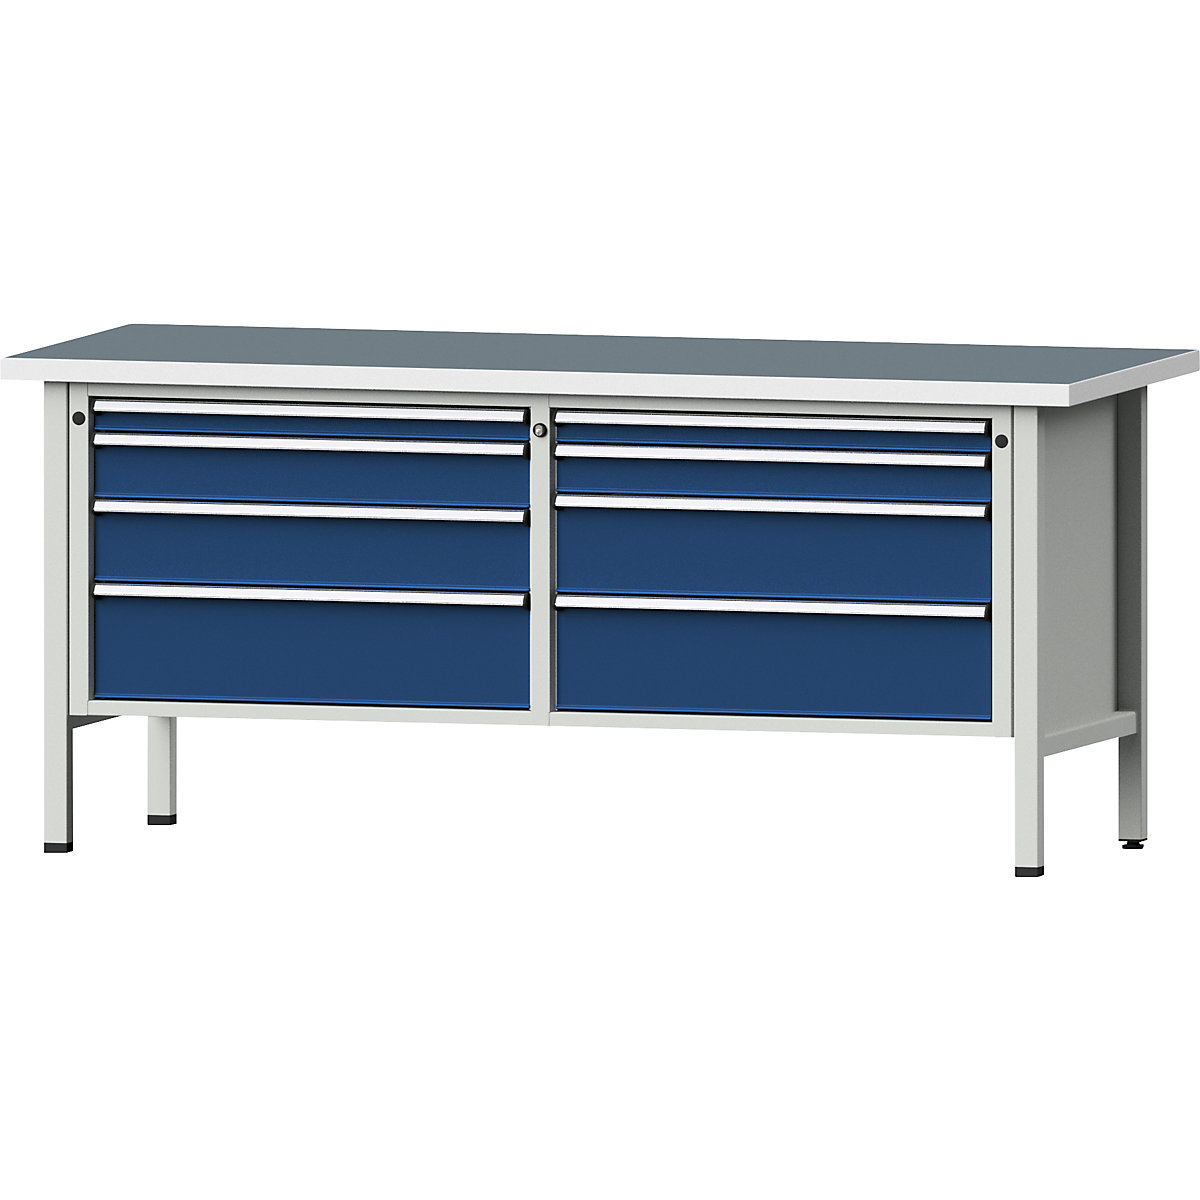 Workbenches 2000 mm wide, frame construction – ANKE, 8 drawers, universal worktop, height 890 mm-9